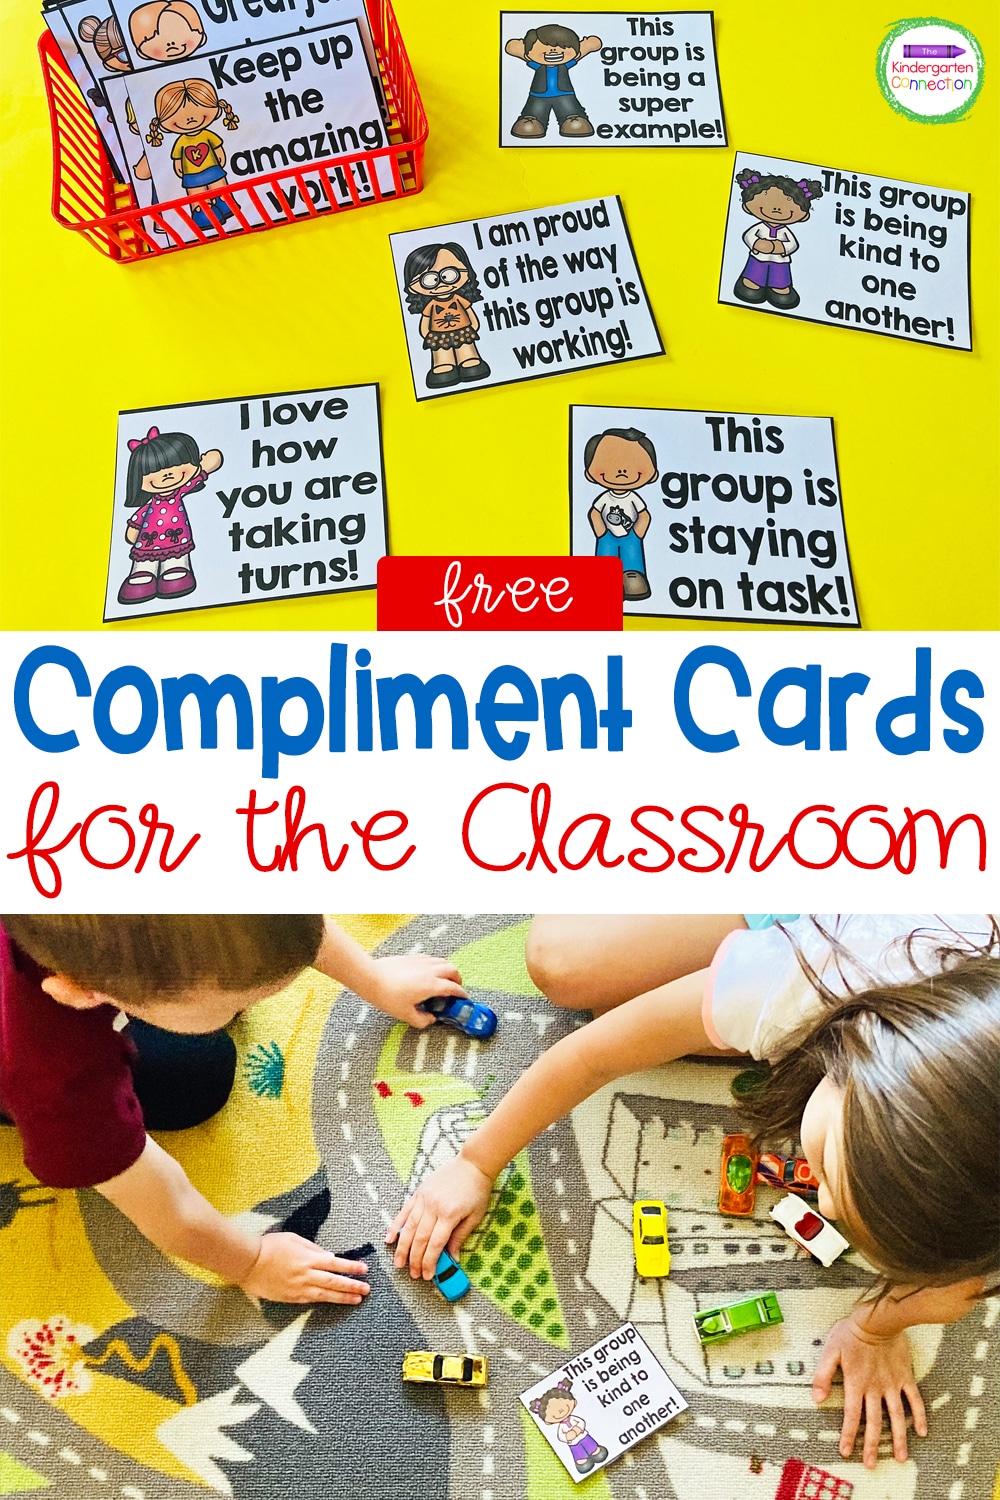 These FREE Compliment Cards are a great tool for motivating your students, and promoting positive behavior and teamwork!